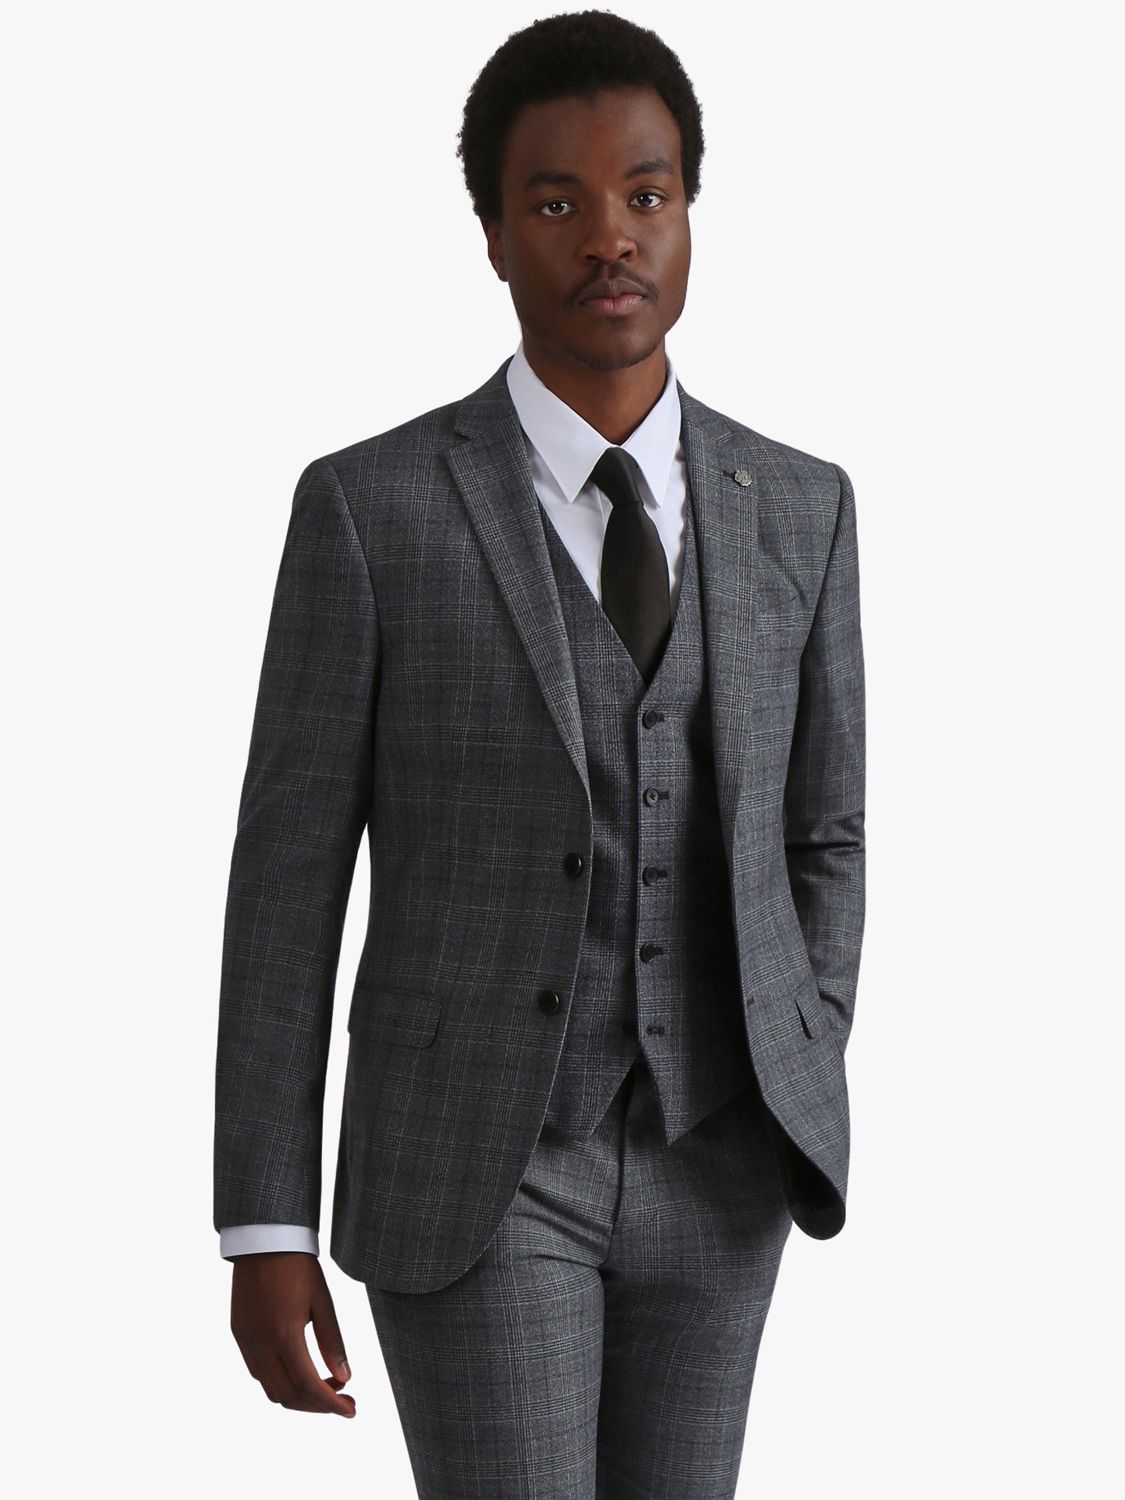 Ted Baker Zion Check Suit Jacket, Charcoal, 42S